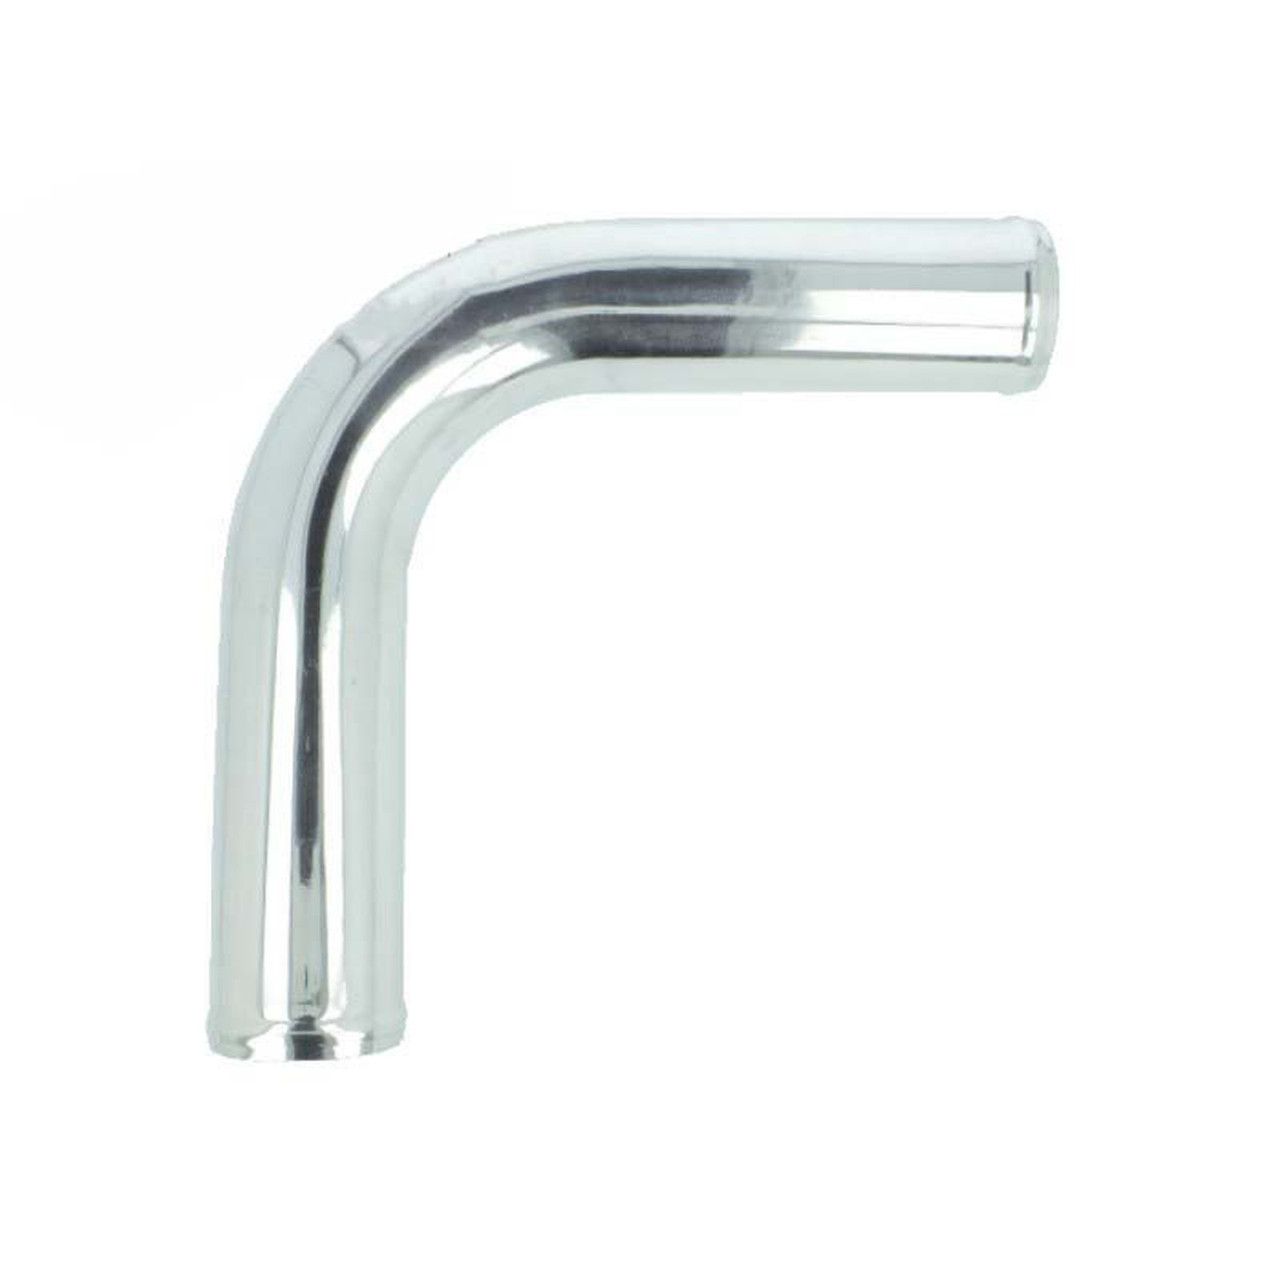 BOOST Products Aluminum Elbow 90 Degrees with 3-1/2" OD, Mandrel Bent, Polished (BOP-3102029089)